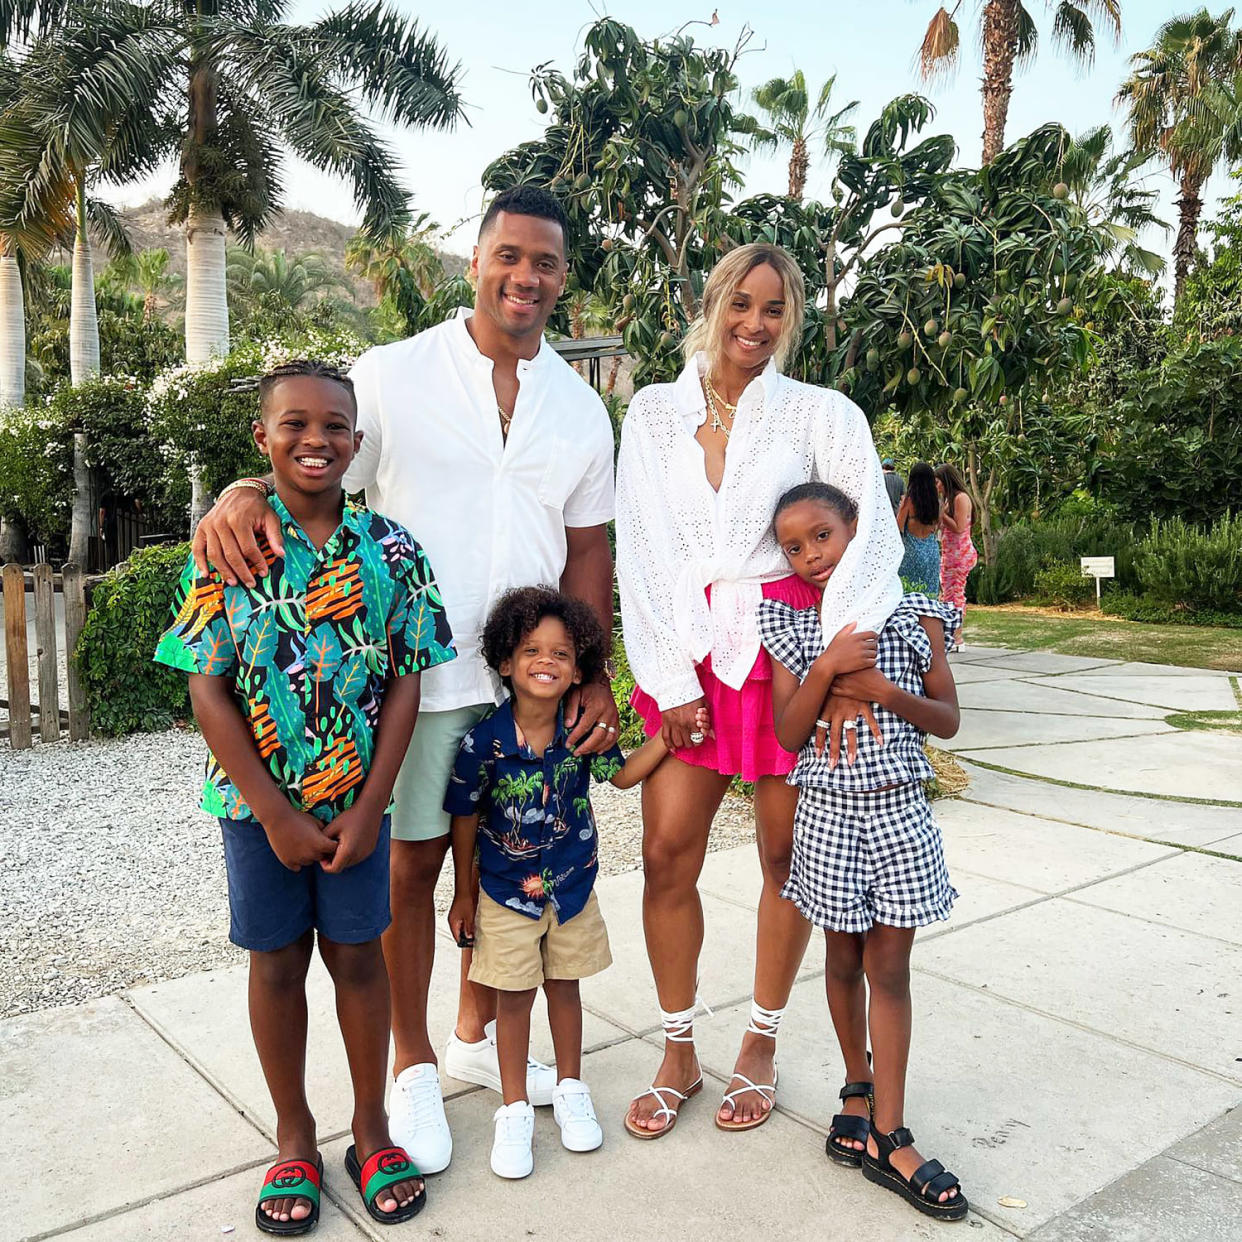 Ciara and Russell Wilson smile with their kids: Future, Win and Sienna. (@dangerusswilson via Instagram)